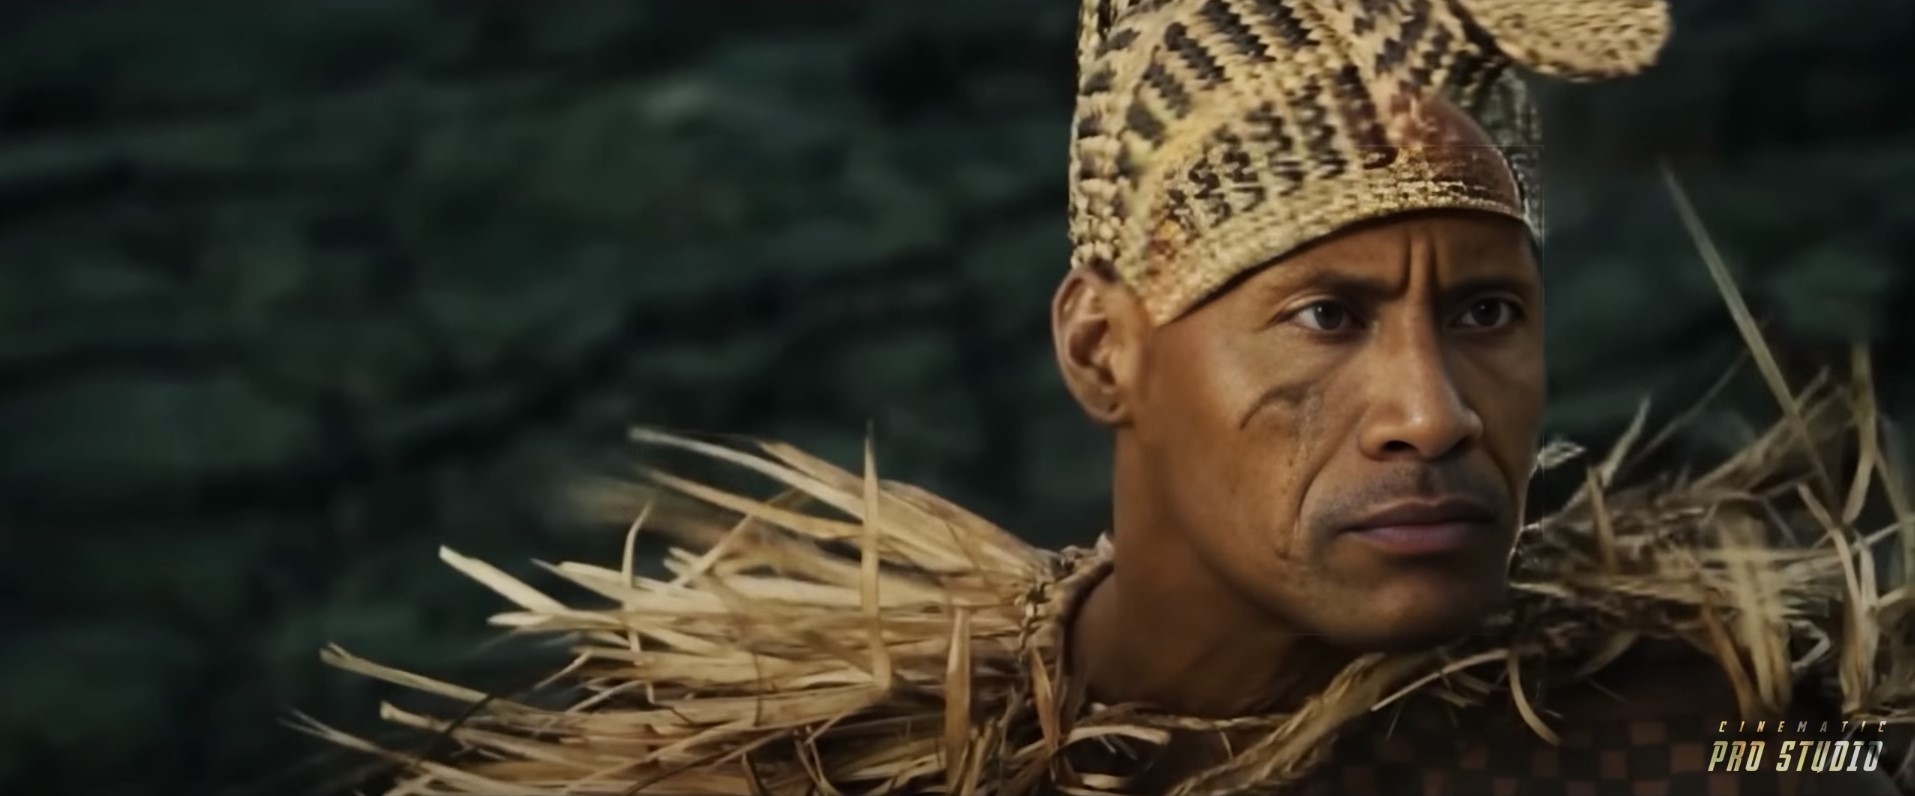 Fans Can't Believe New 'Moana' Look With Zendaya and Dwayne Johnson -  Inside the Magic